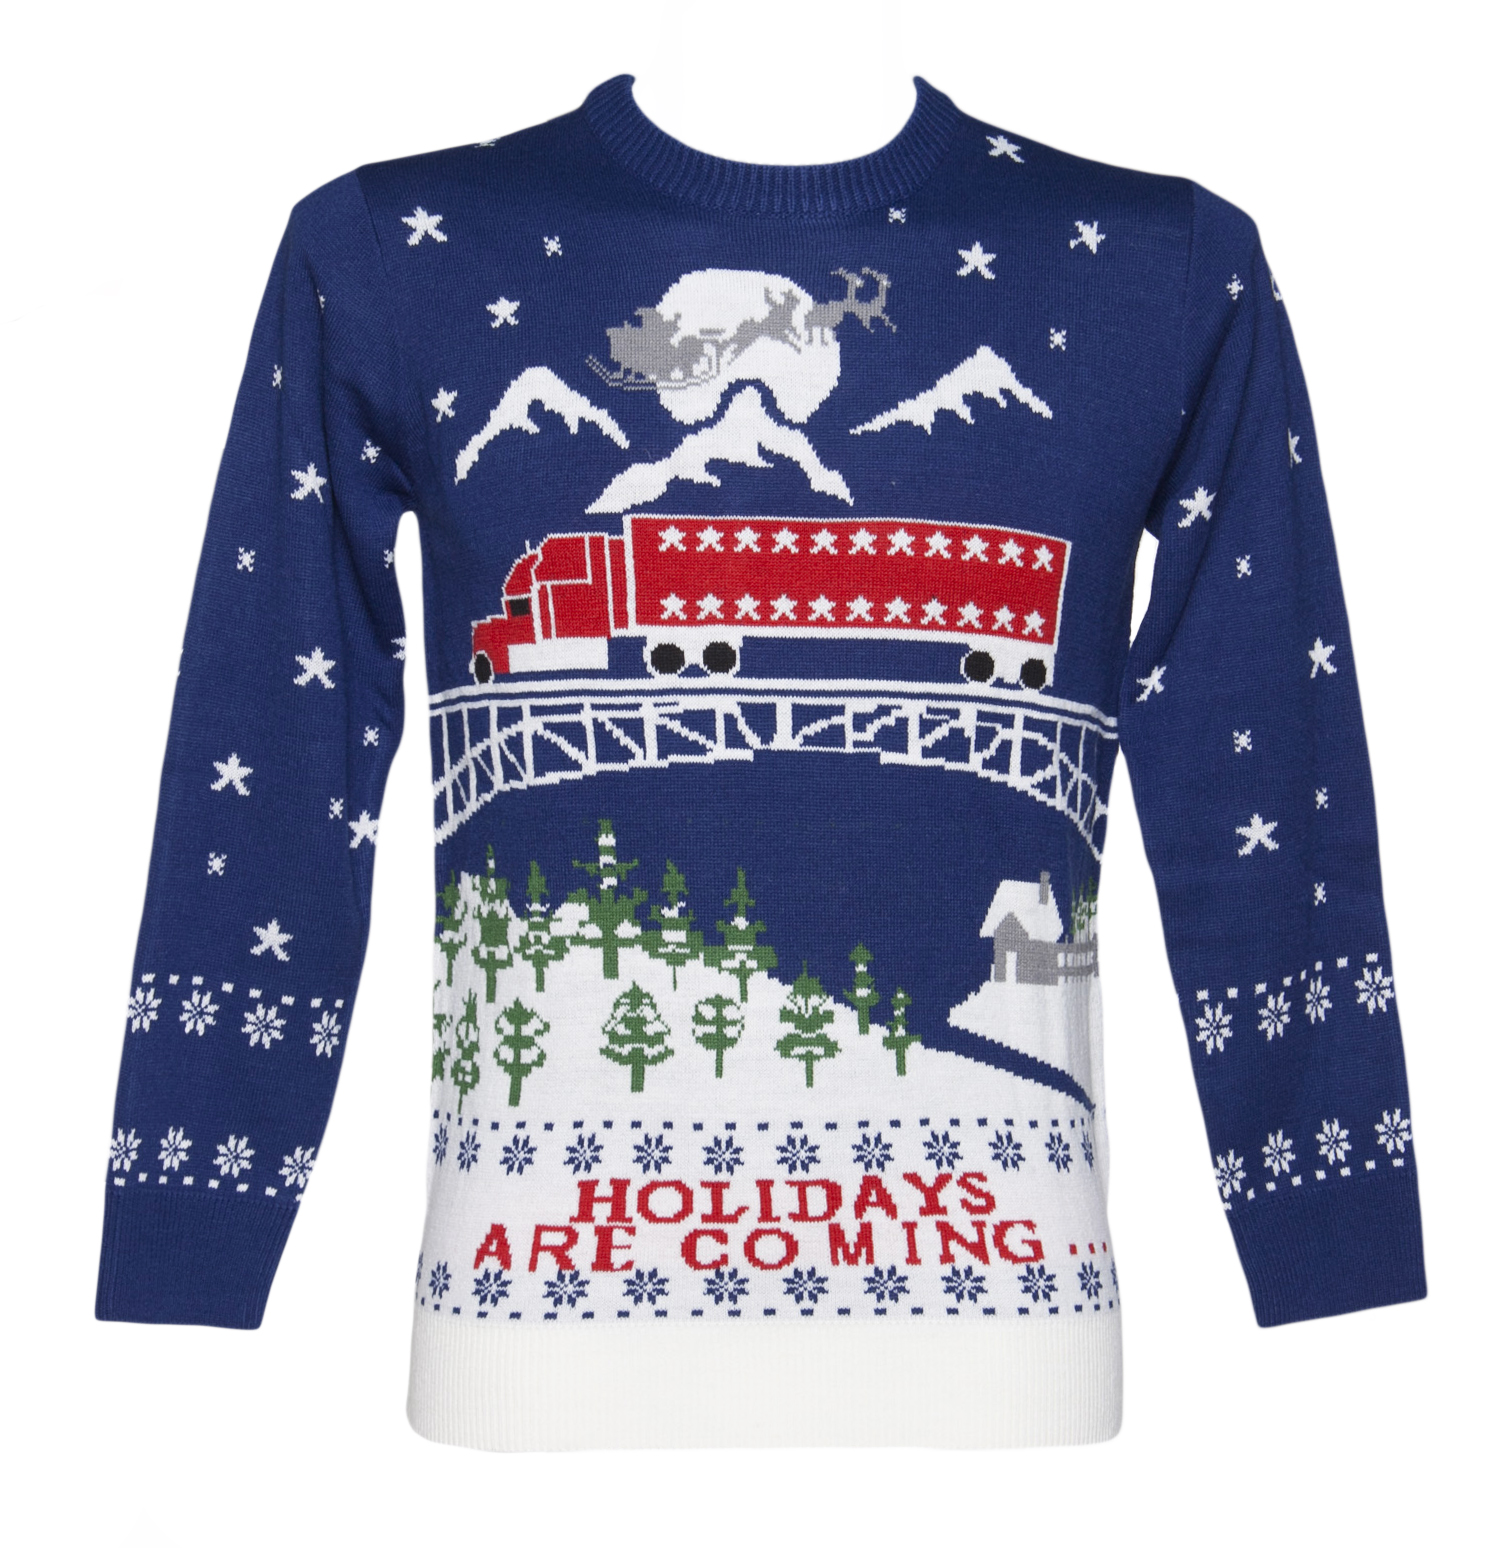 Cheesy Christmas Jumpers Unisex Holidays Are Coming Christmas Jumper from